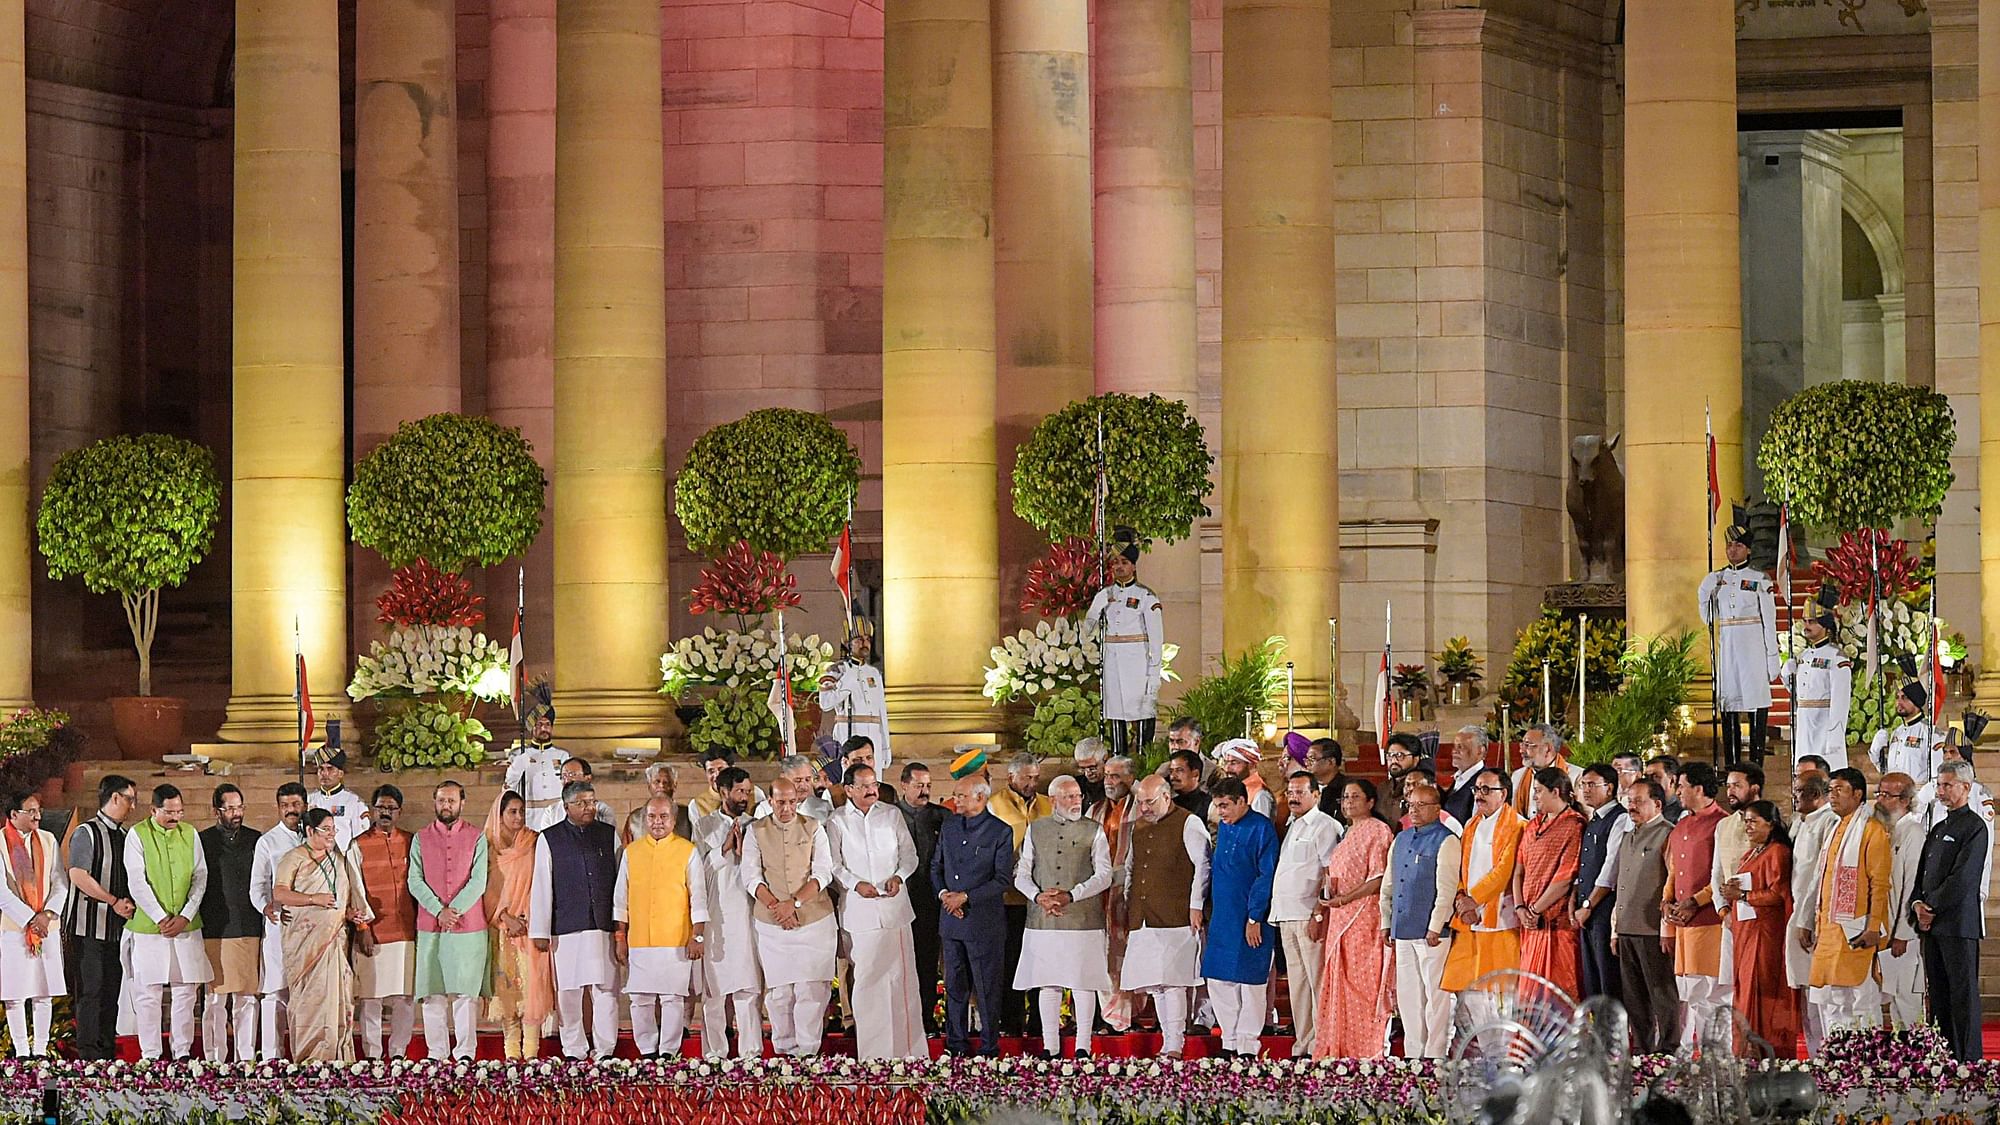 President Ram Nath Kovind, Prime Minister Narendra Modi and the newly sworn-in council of ministers in a group photograph after the oath-taking ceremony at Rashtrapati Bhavan in New Delhi.